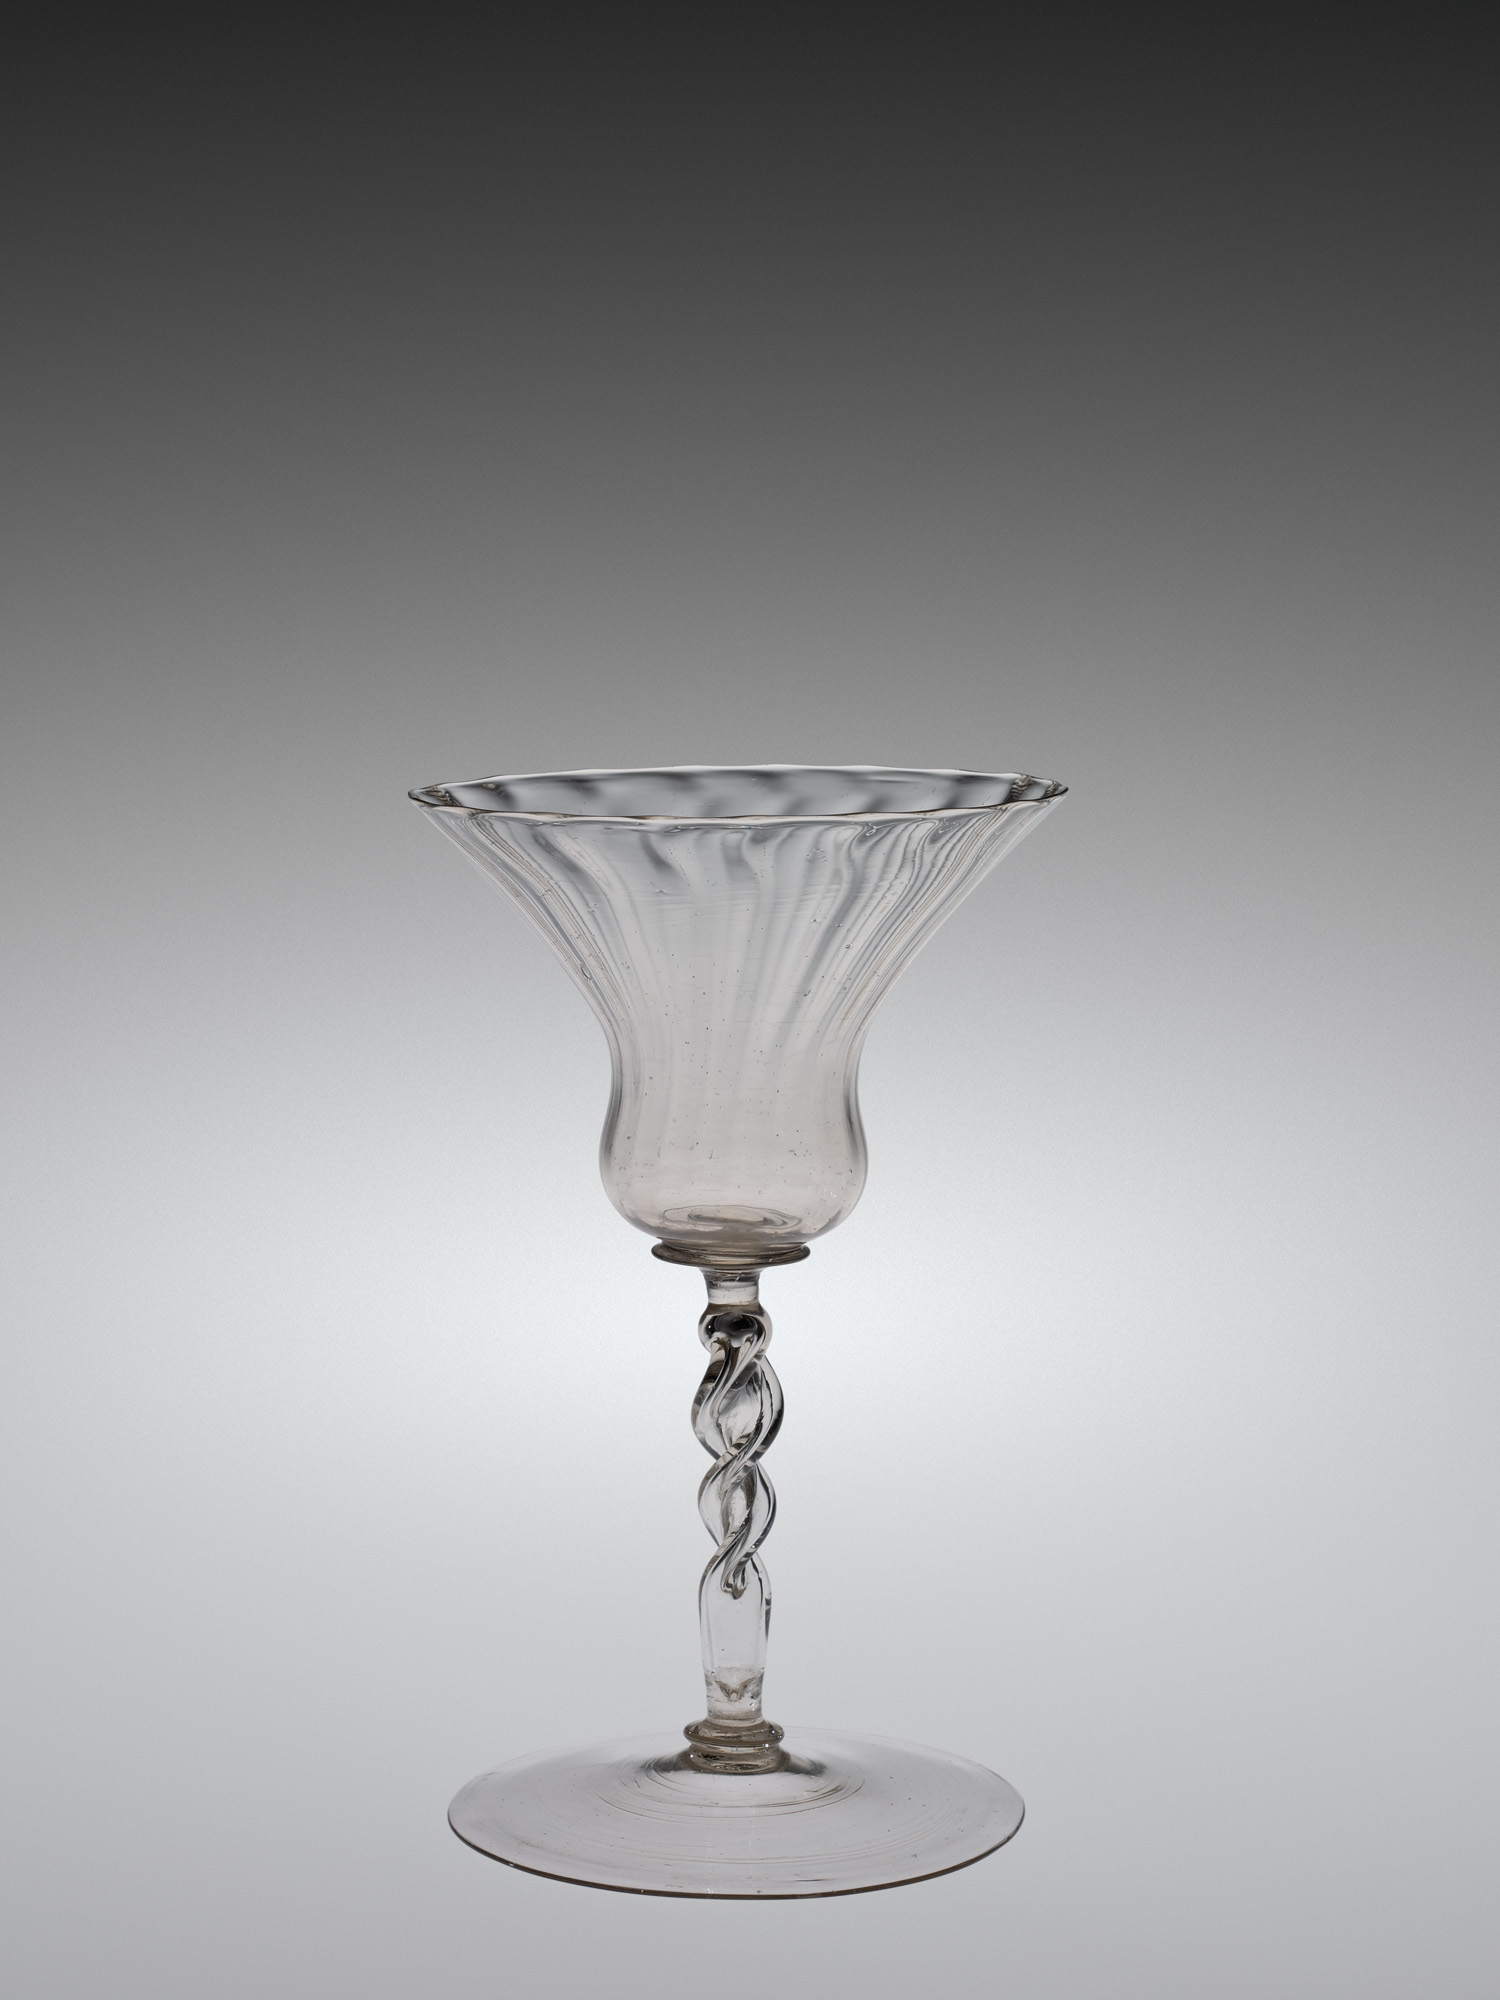 Wineglass with Kuttrolf Stem